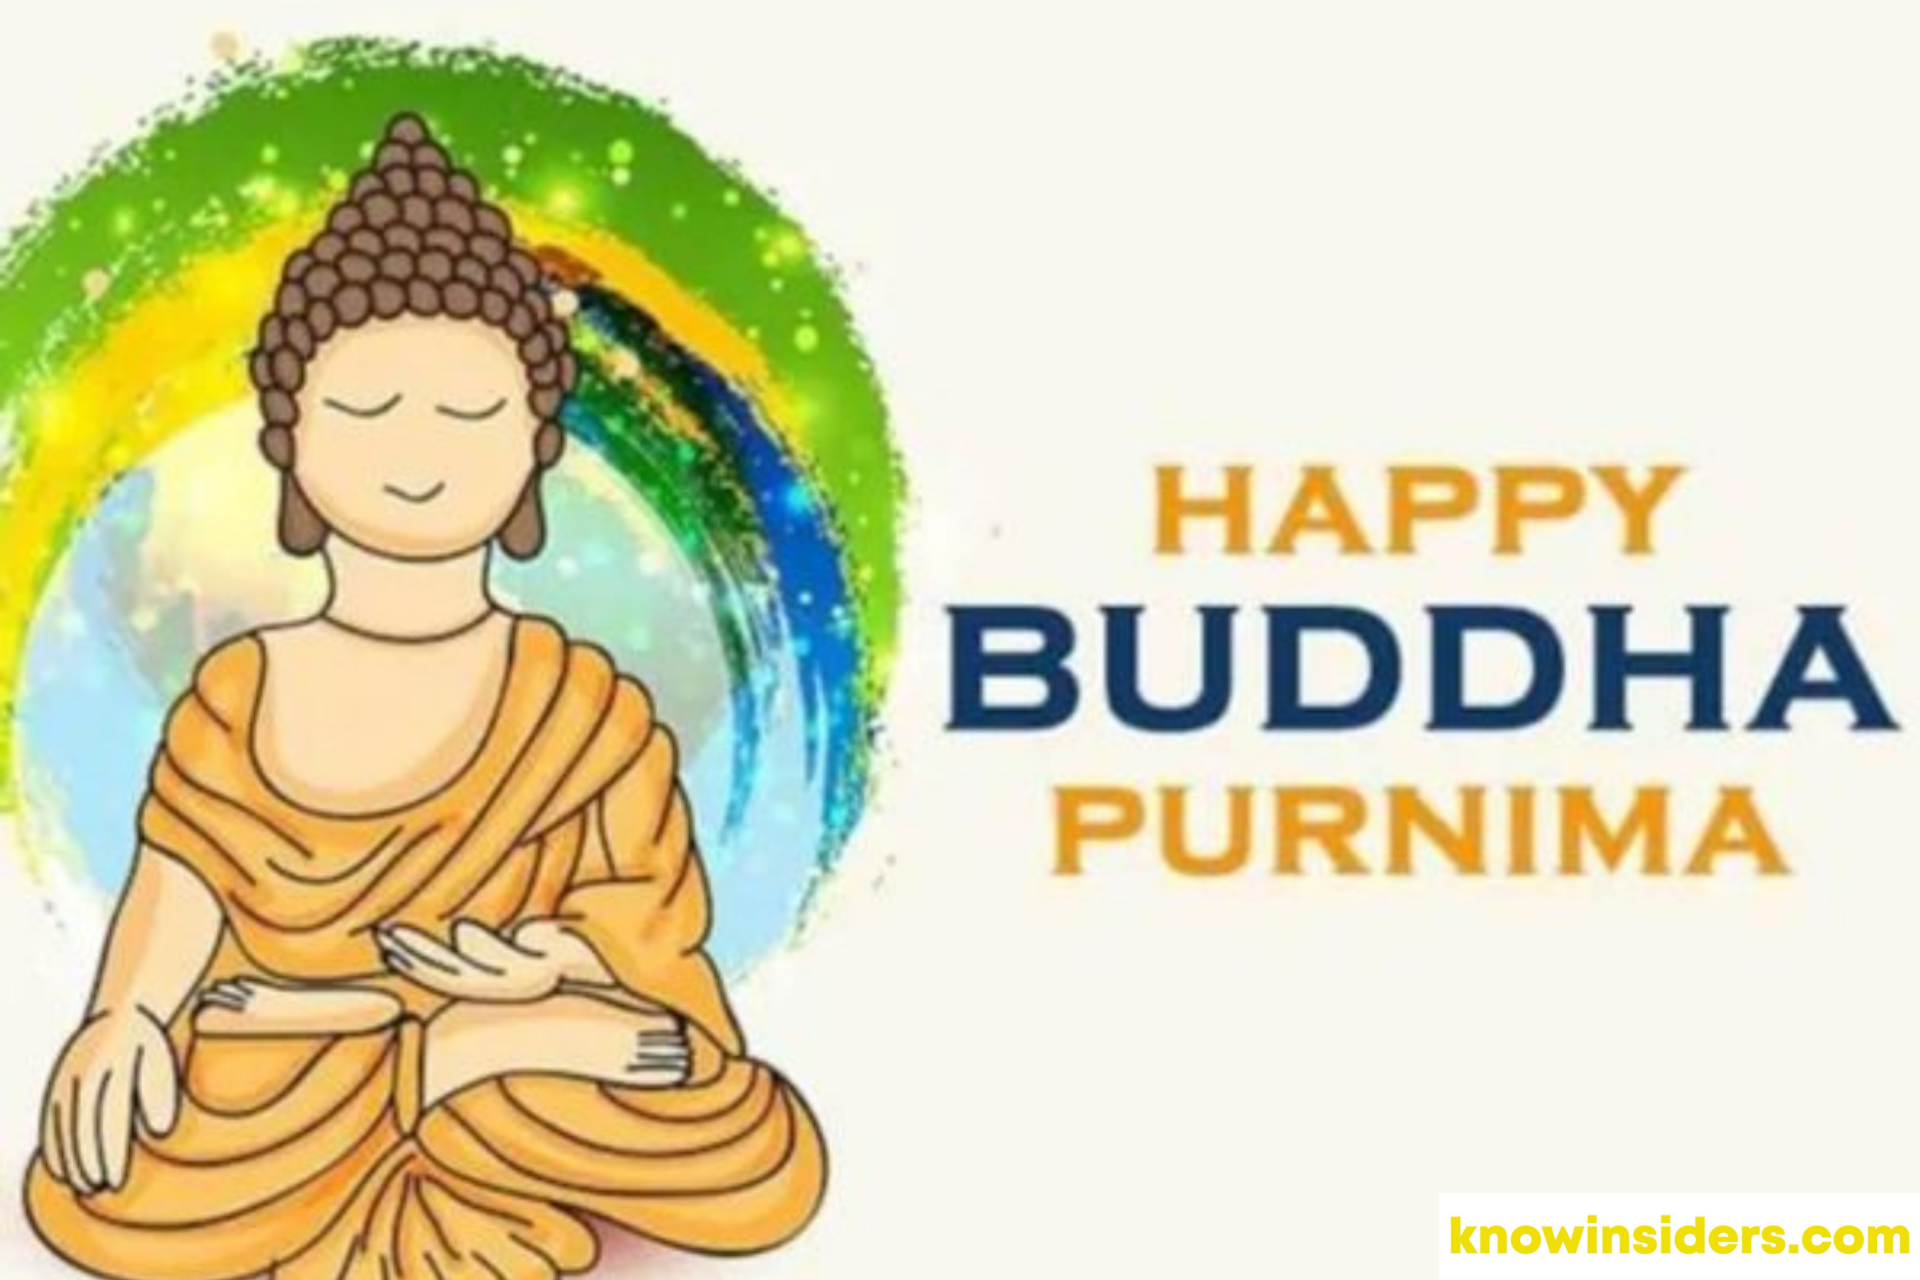 Buddha Purnima (May 7): History, Significance, Wishes and Quotes